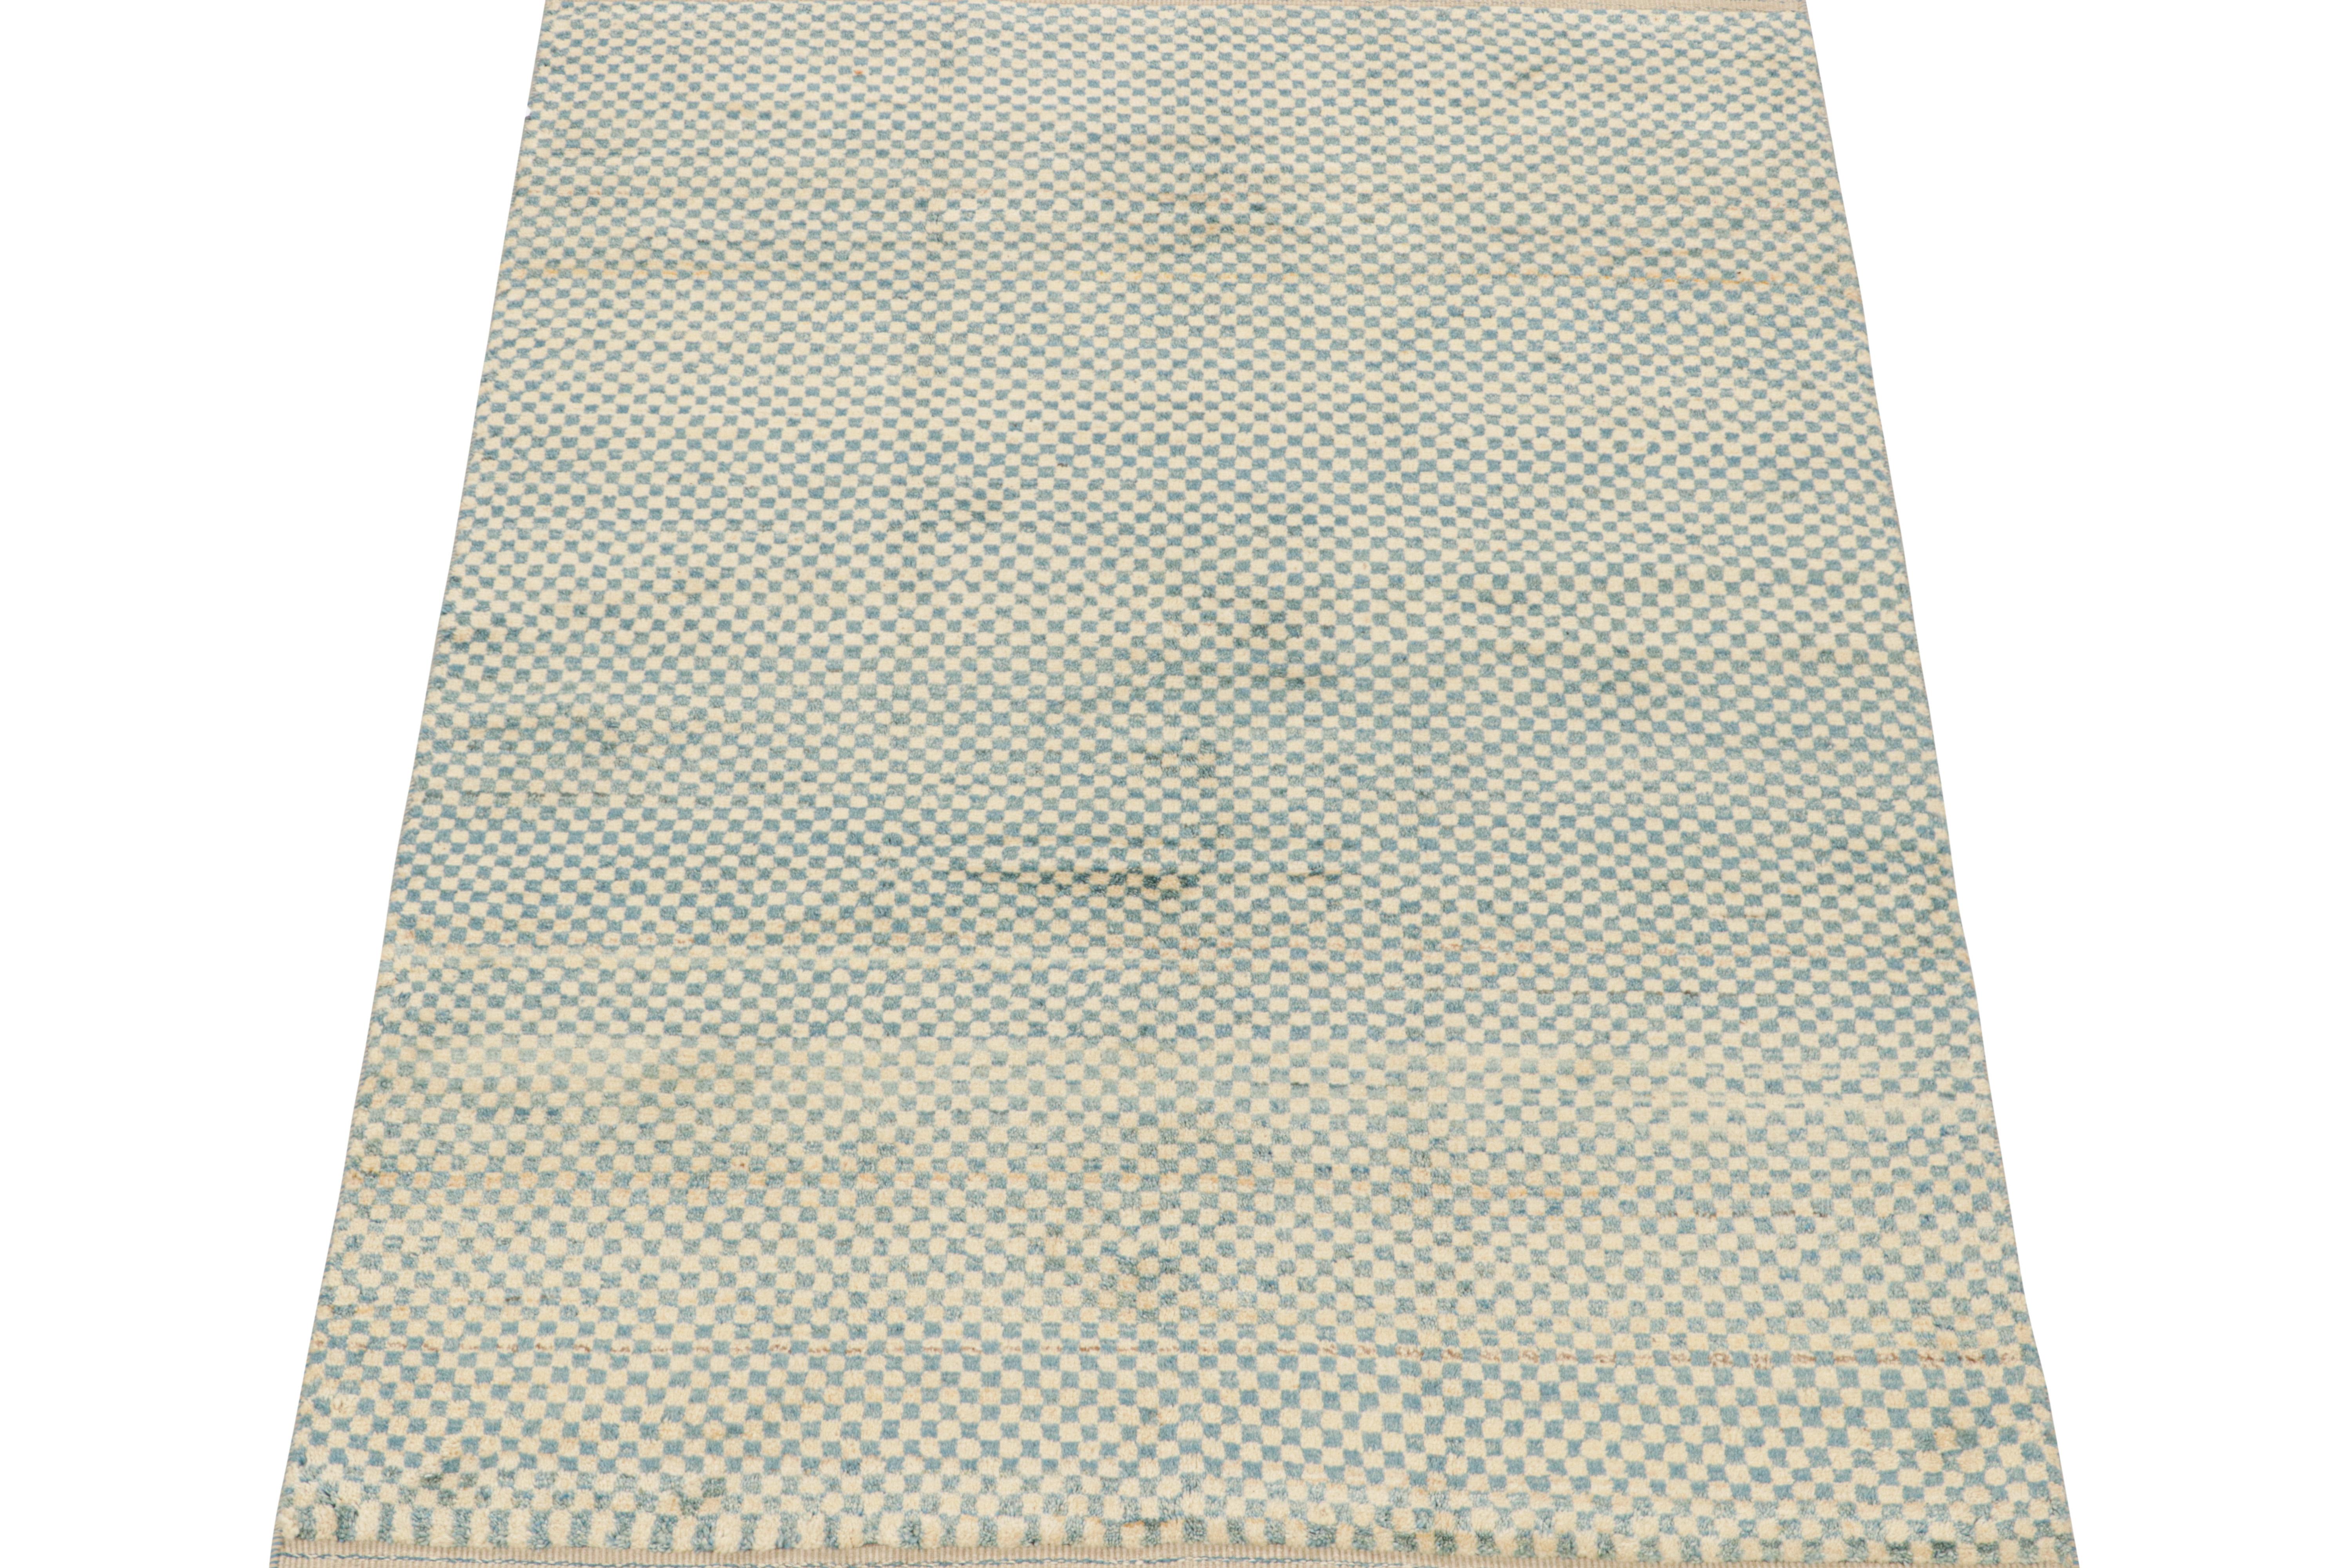 This contemporary 5x8 rug is an exciting new addition to the Modern Classics Collection by Rug & Kilim. 

Its design reflects a take on Gabbeh rugs by a modern Persian atelier with vast experience curating this style. This particular design enjoys a